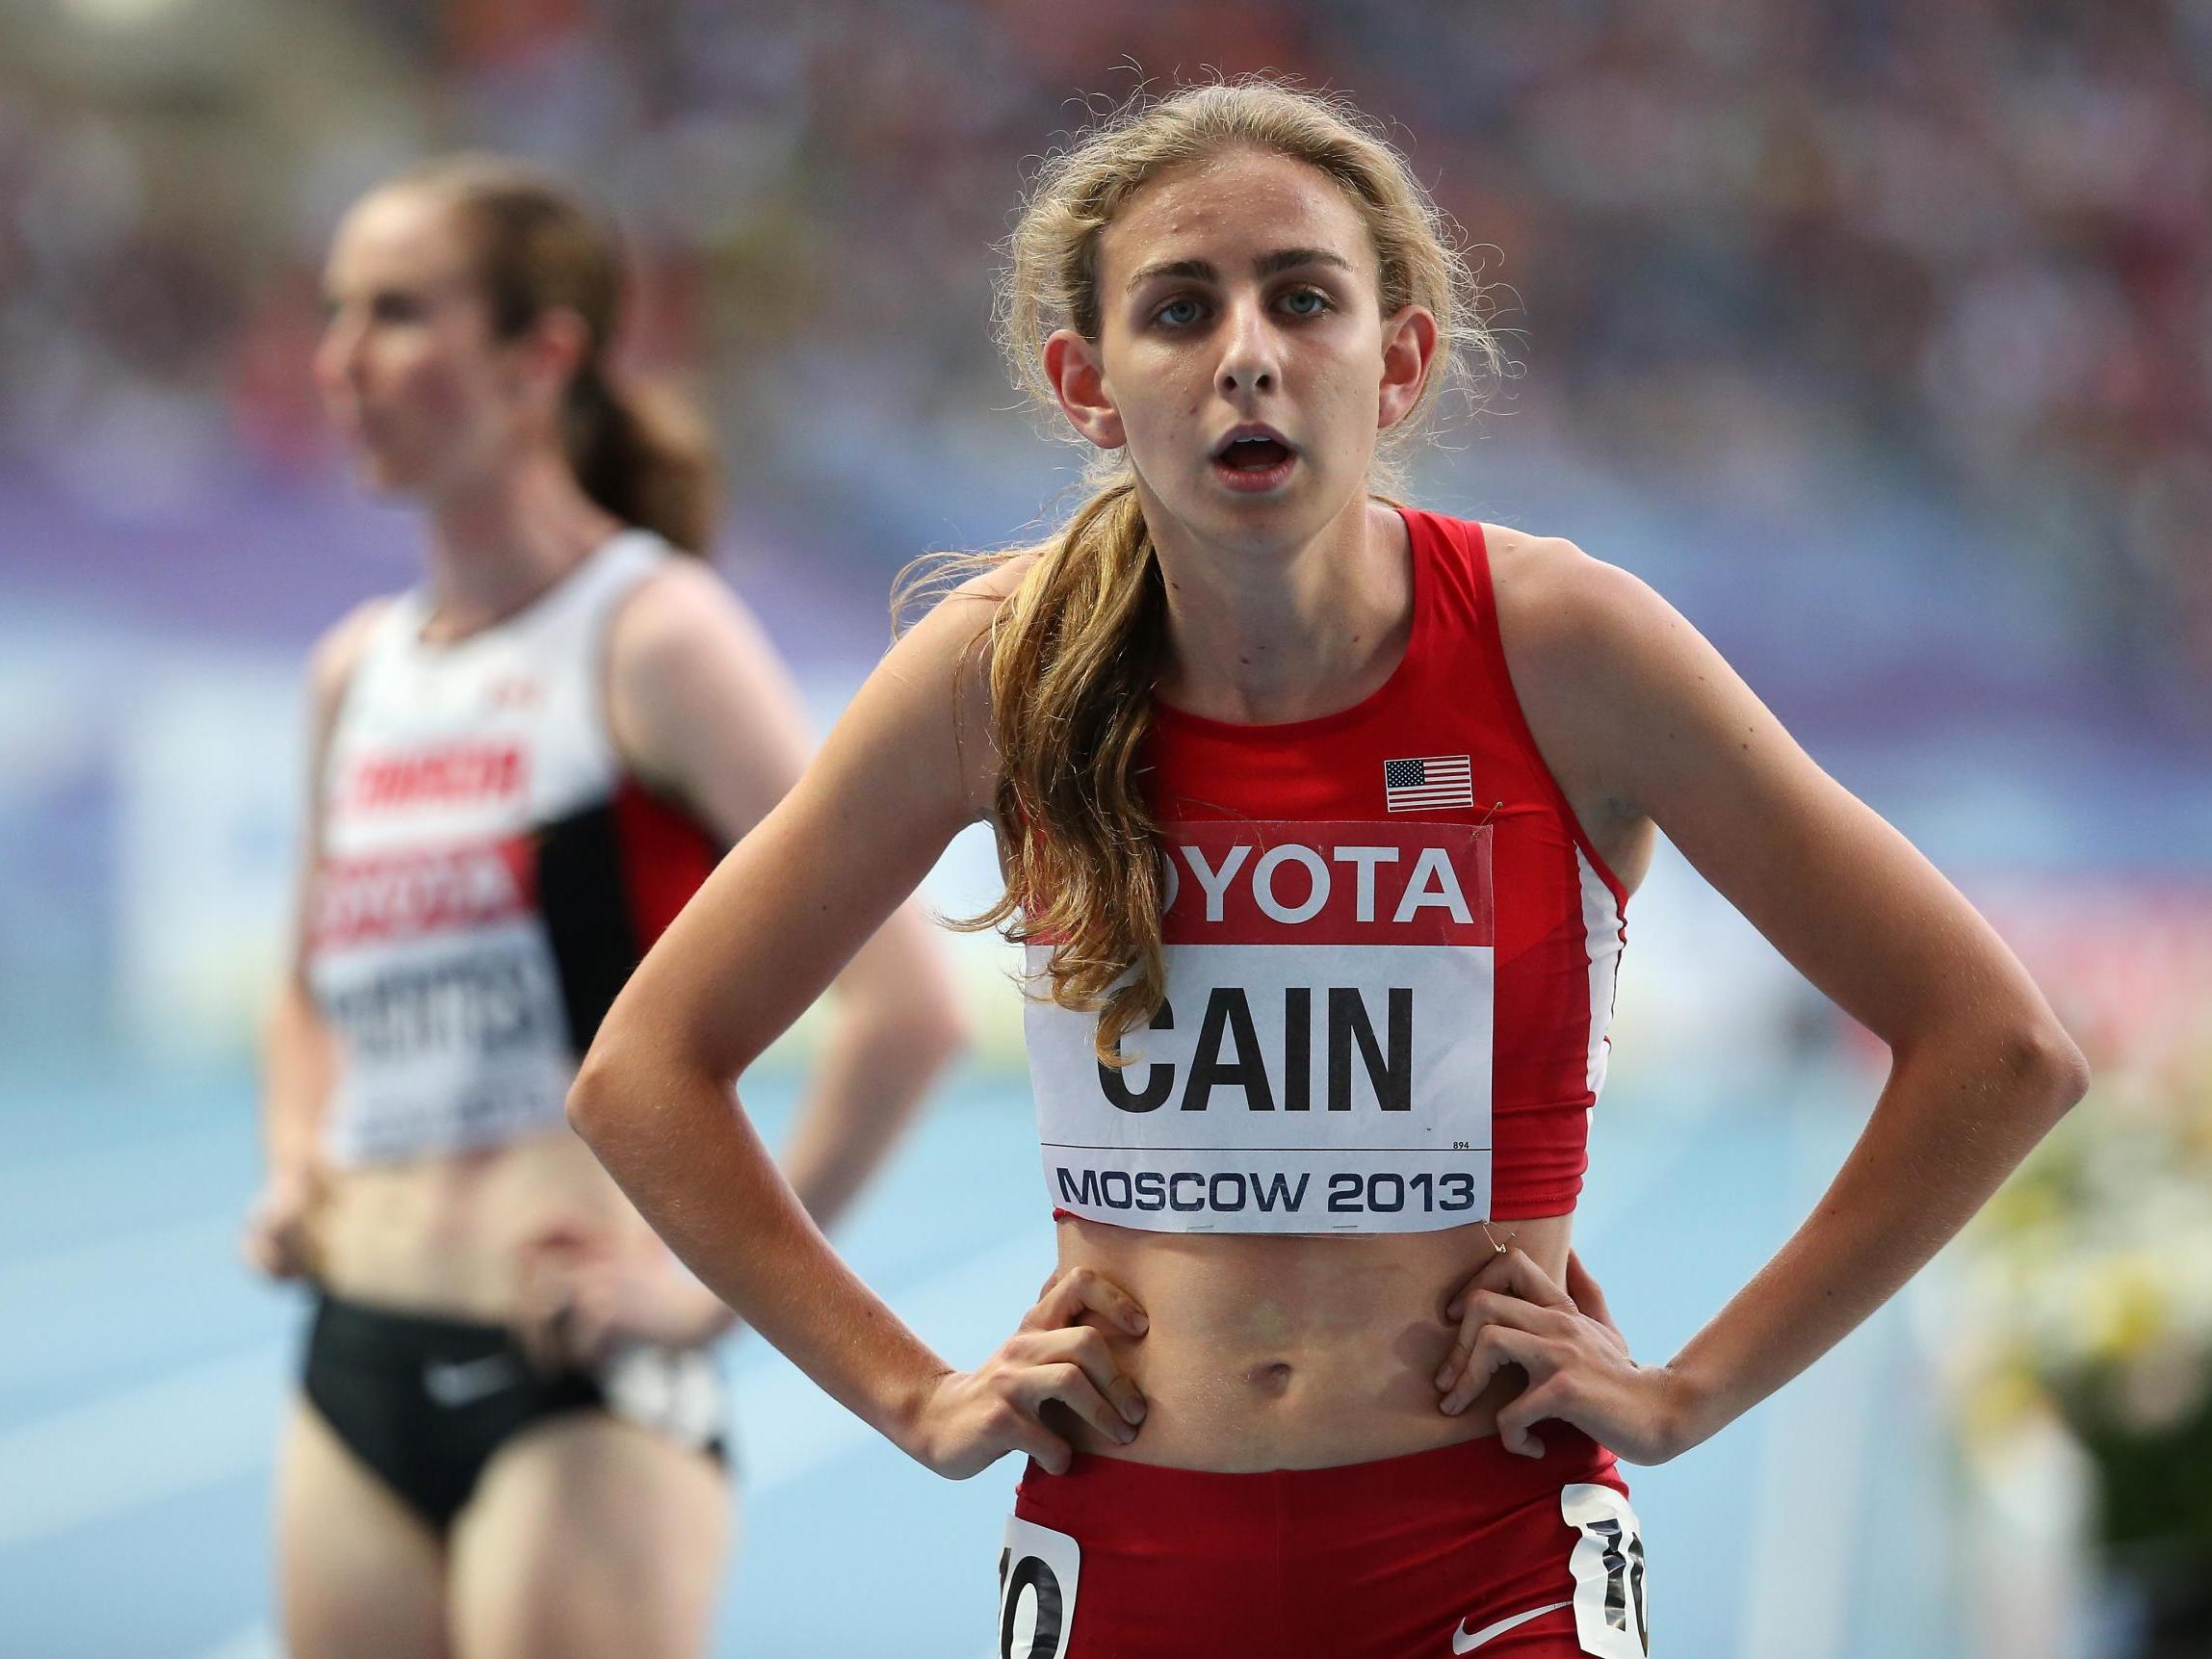 Mary Cain: US athlete accuses Alberto Salazar and Nike of overseeing system of 'physical and emotional abuse'